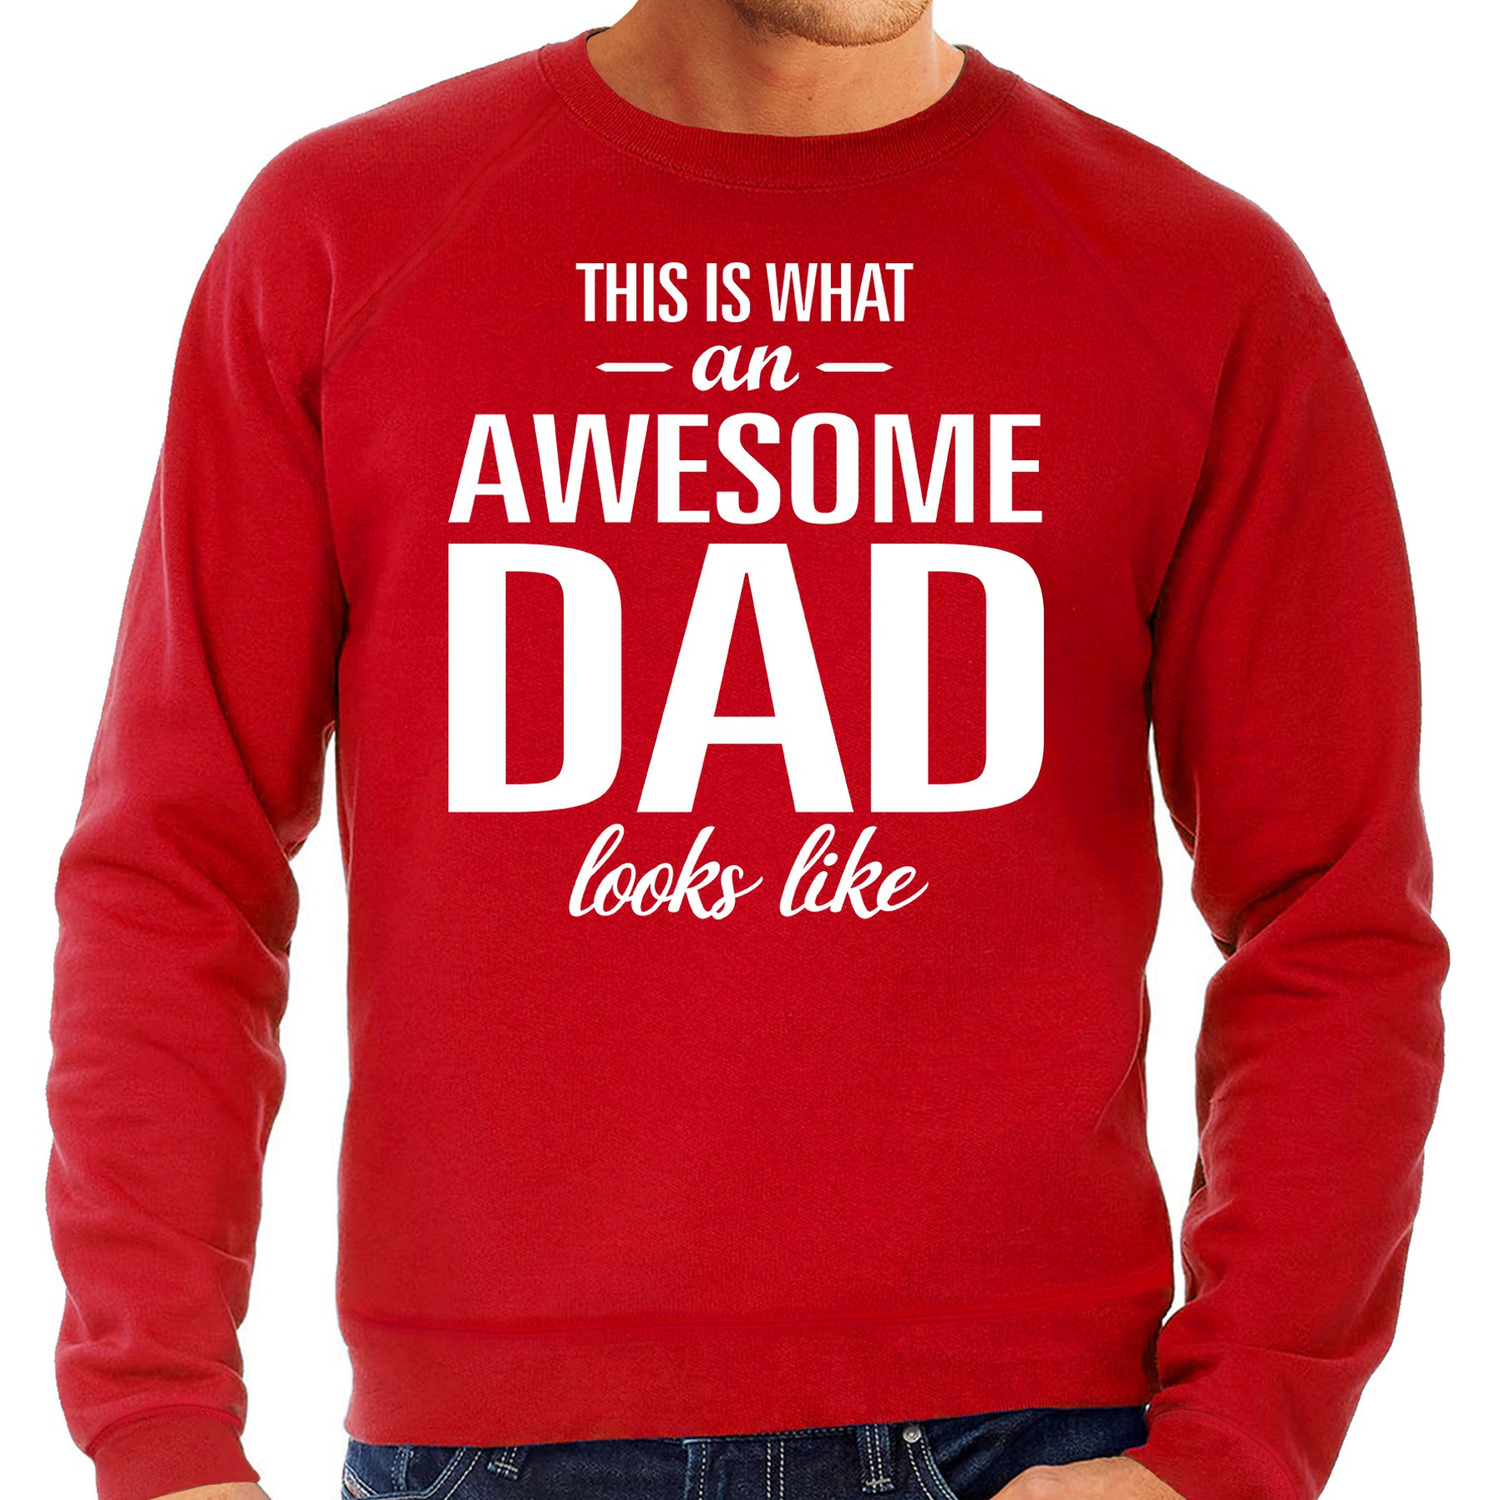 Awesome Dad cadeau sweater rood heren Vaderdag cadeau